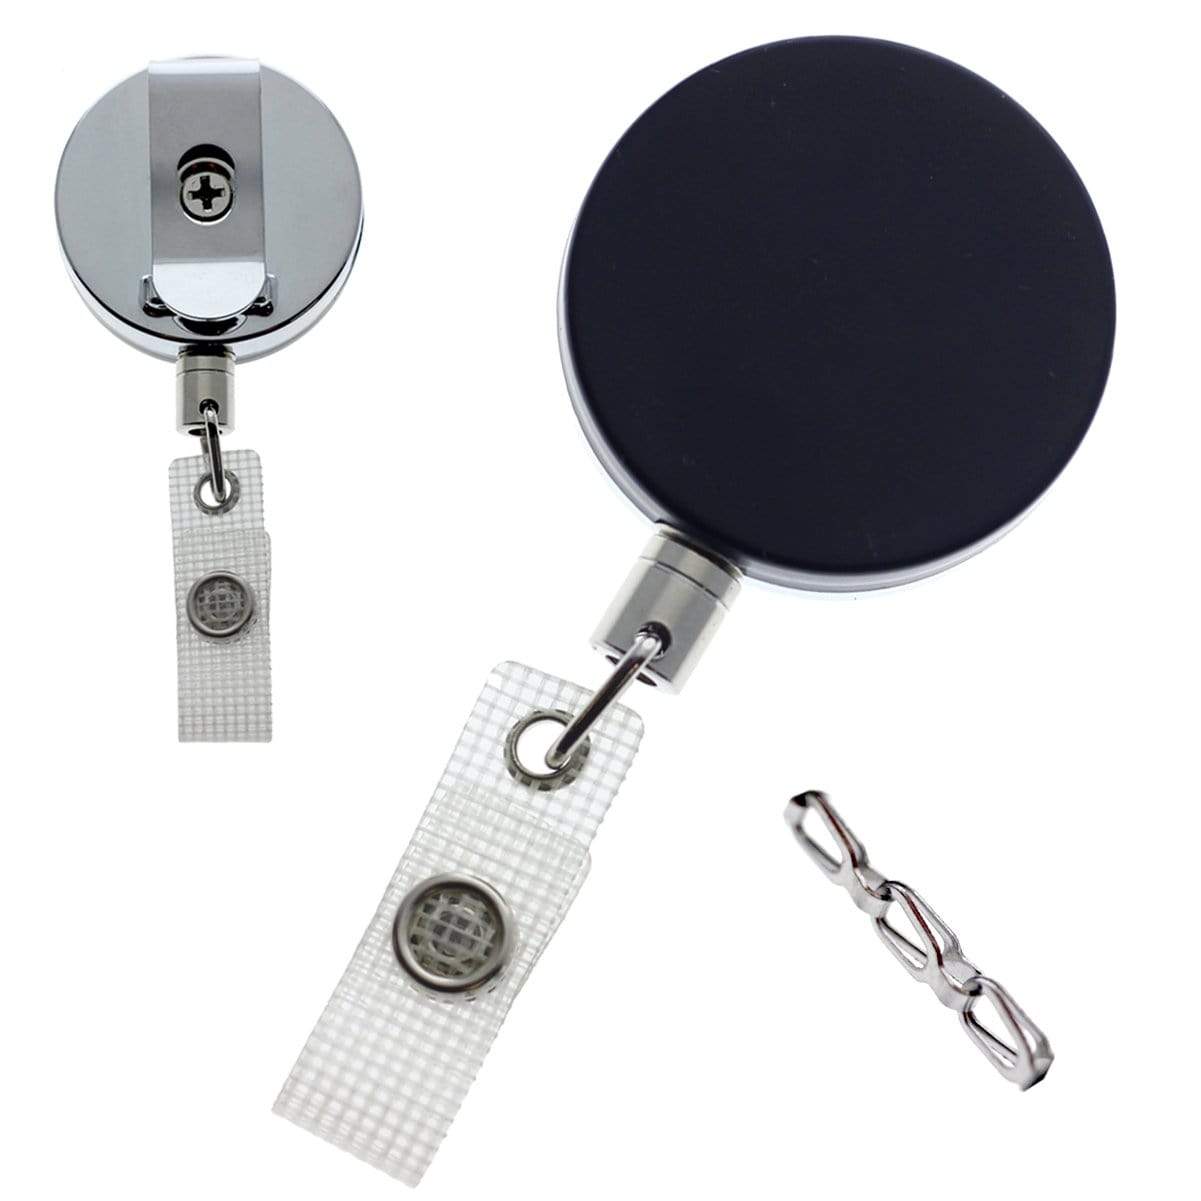 A round, Heavy Duty Badge Reel With Chain (P/N 2120-3375) with a retractable chain and a belt clip, featuring a white fabric attachment point shown from multiple angles.